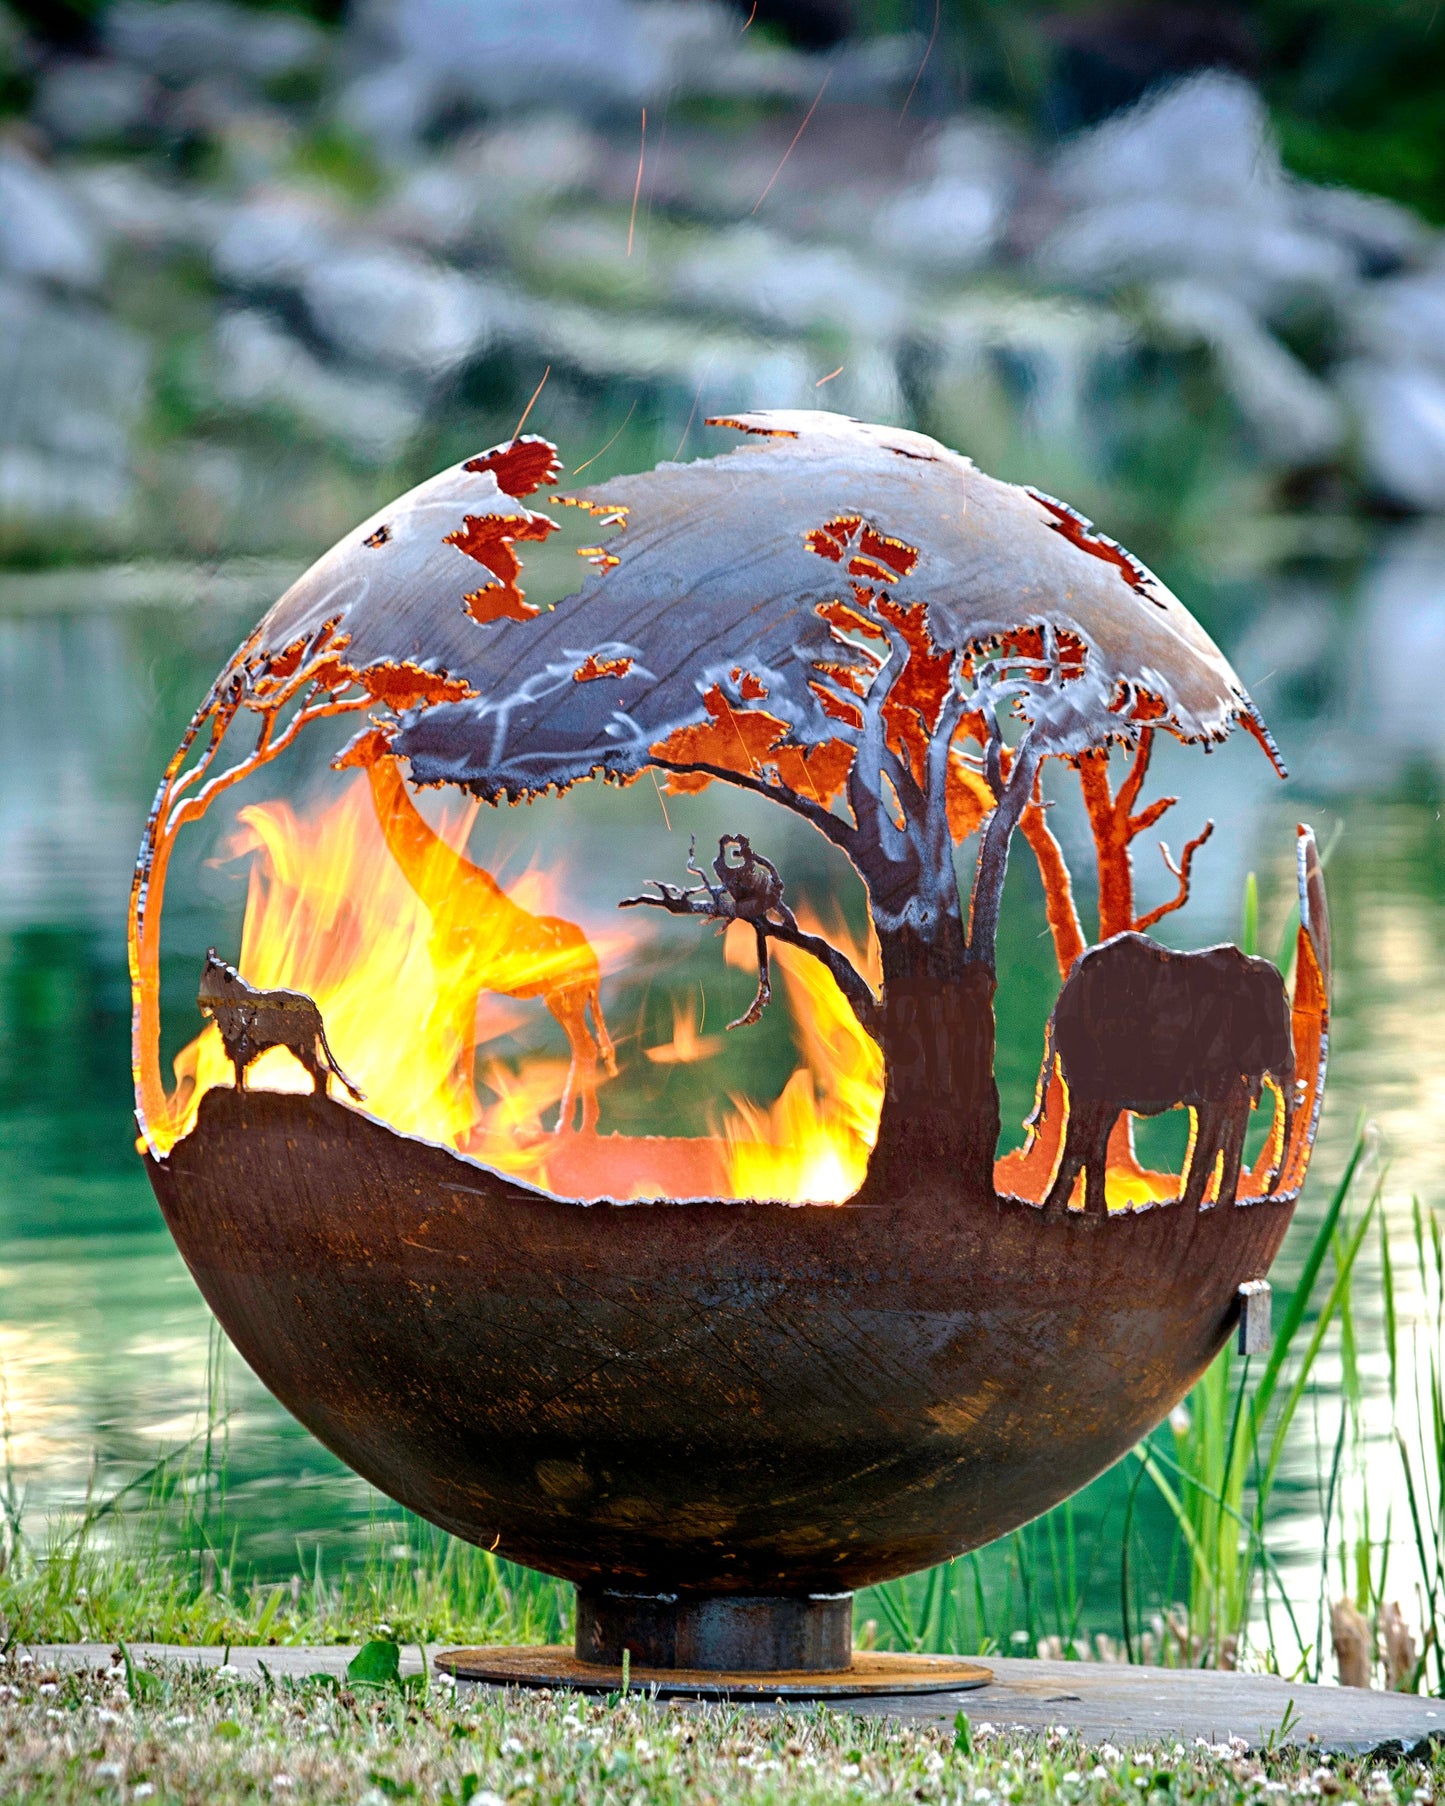 The Fire Pit Gallery African Safari Fire Pit Sphere